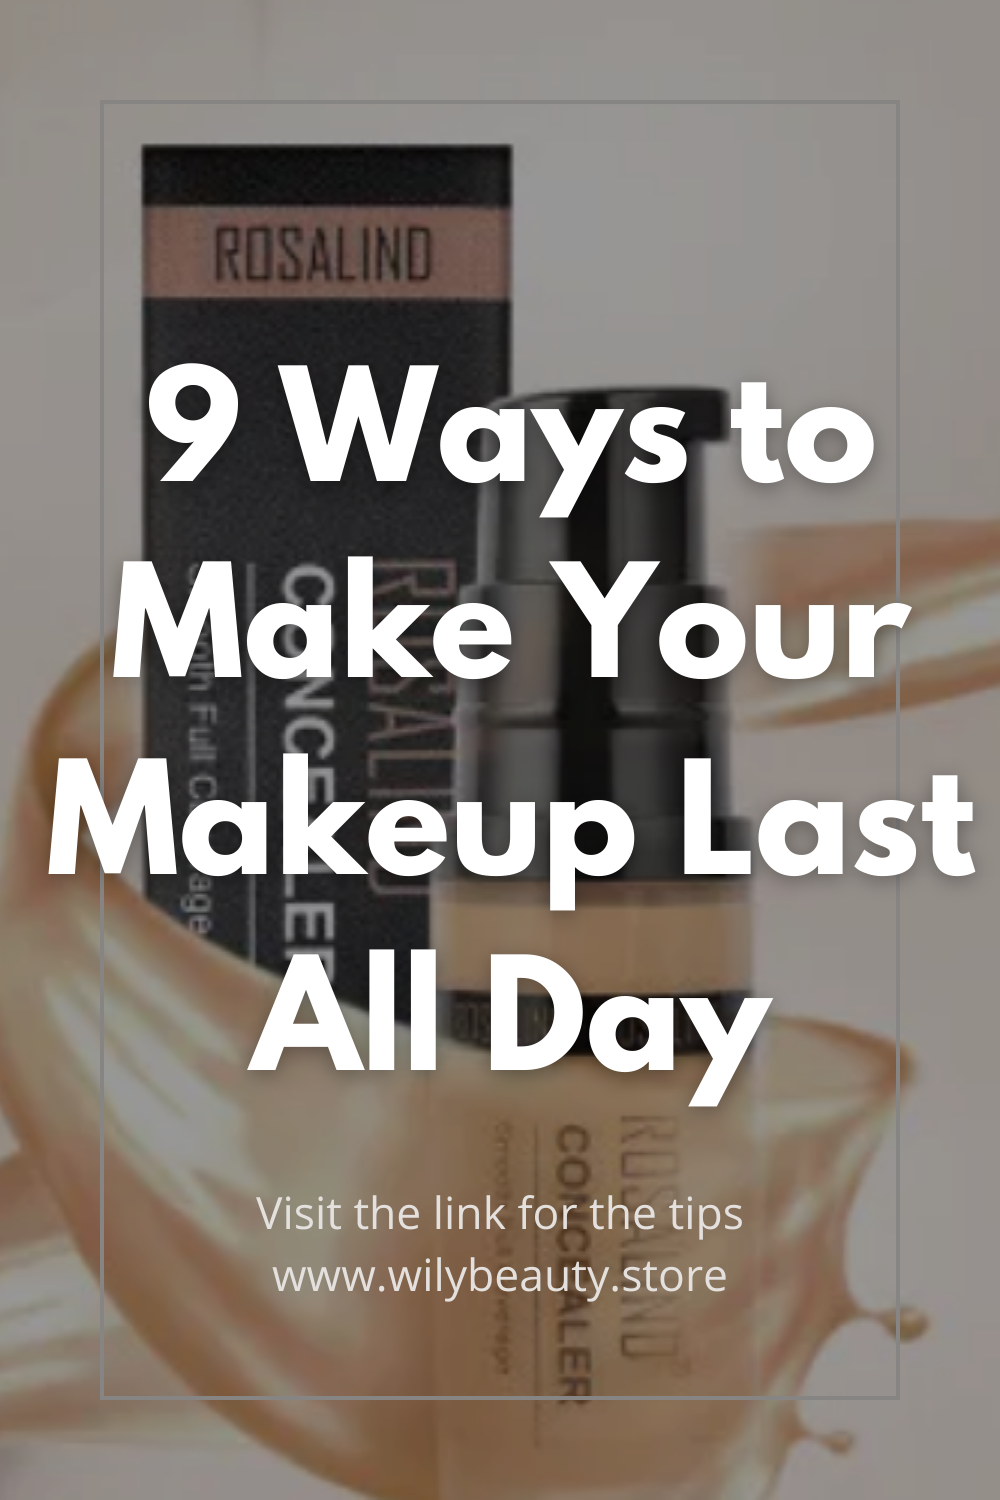 9 Ways to Make Your Makeup Last All Day